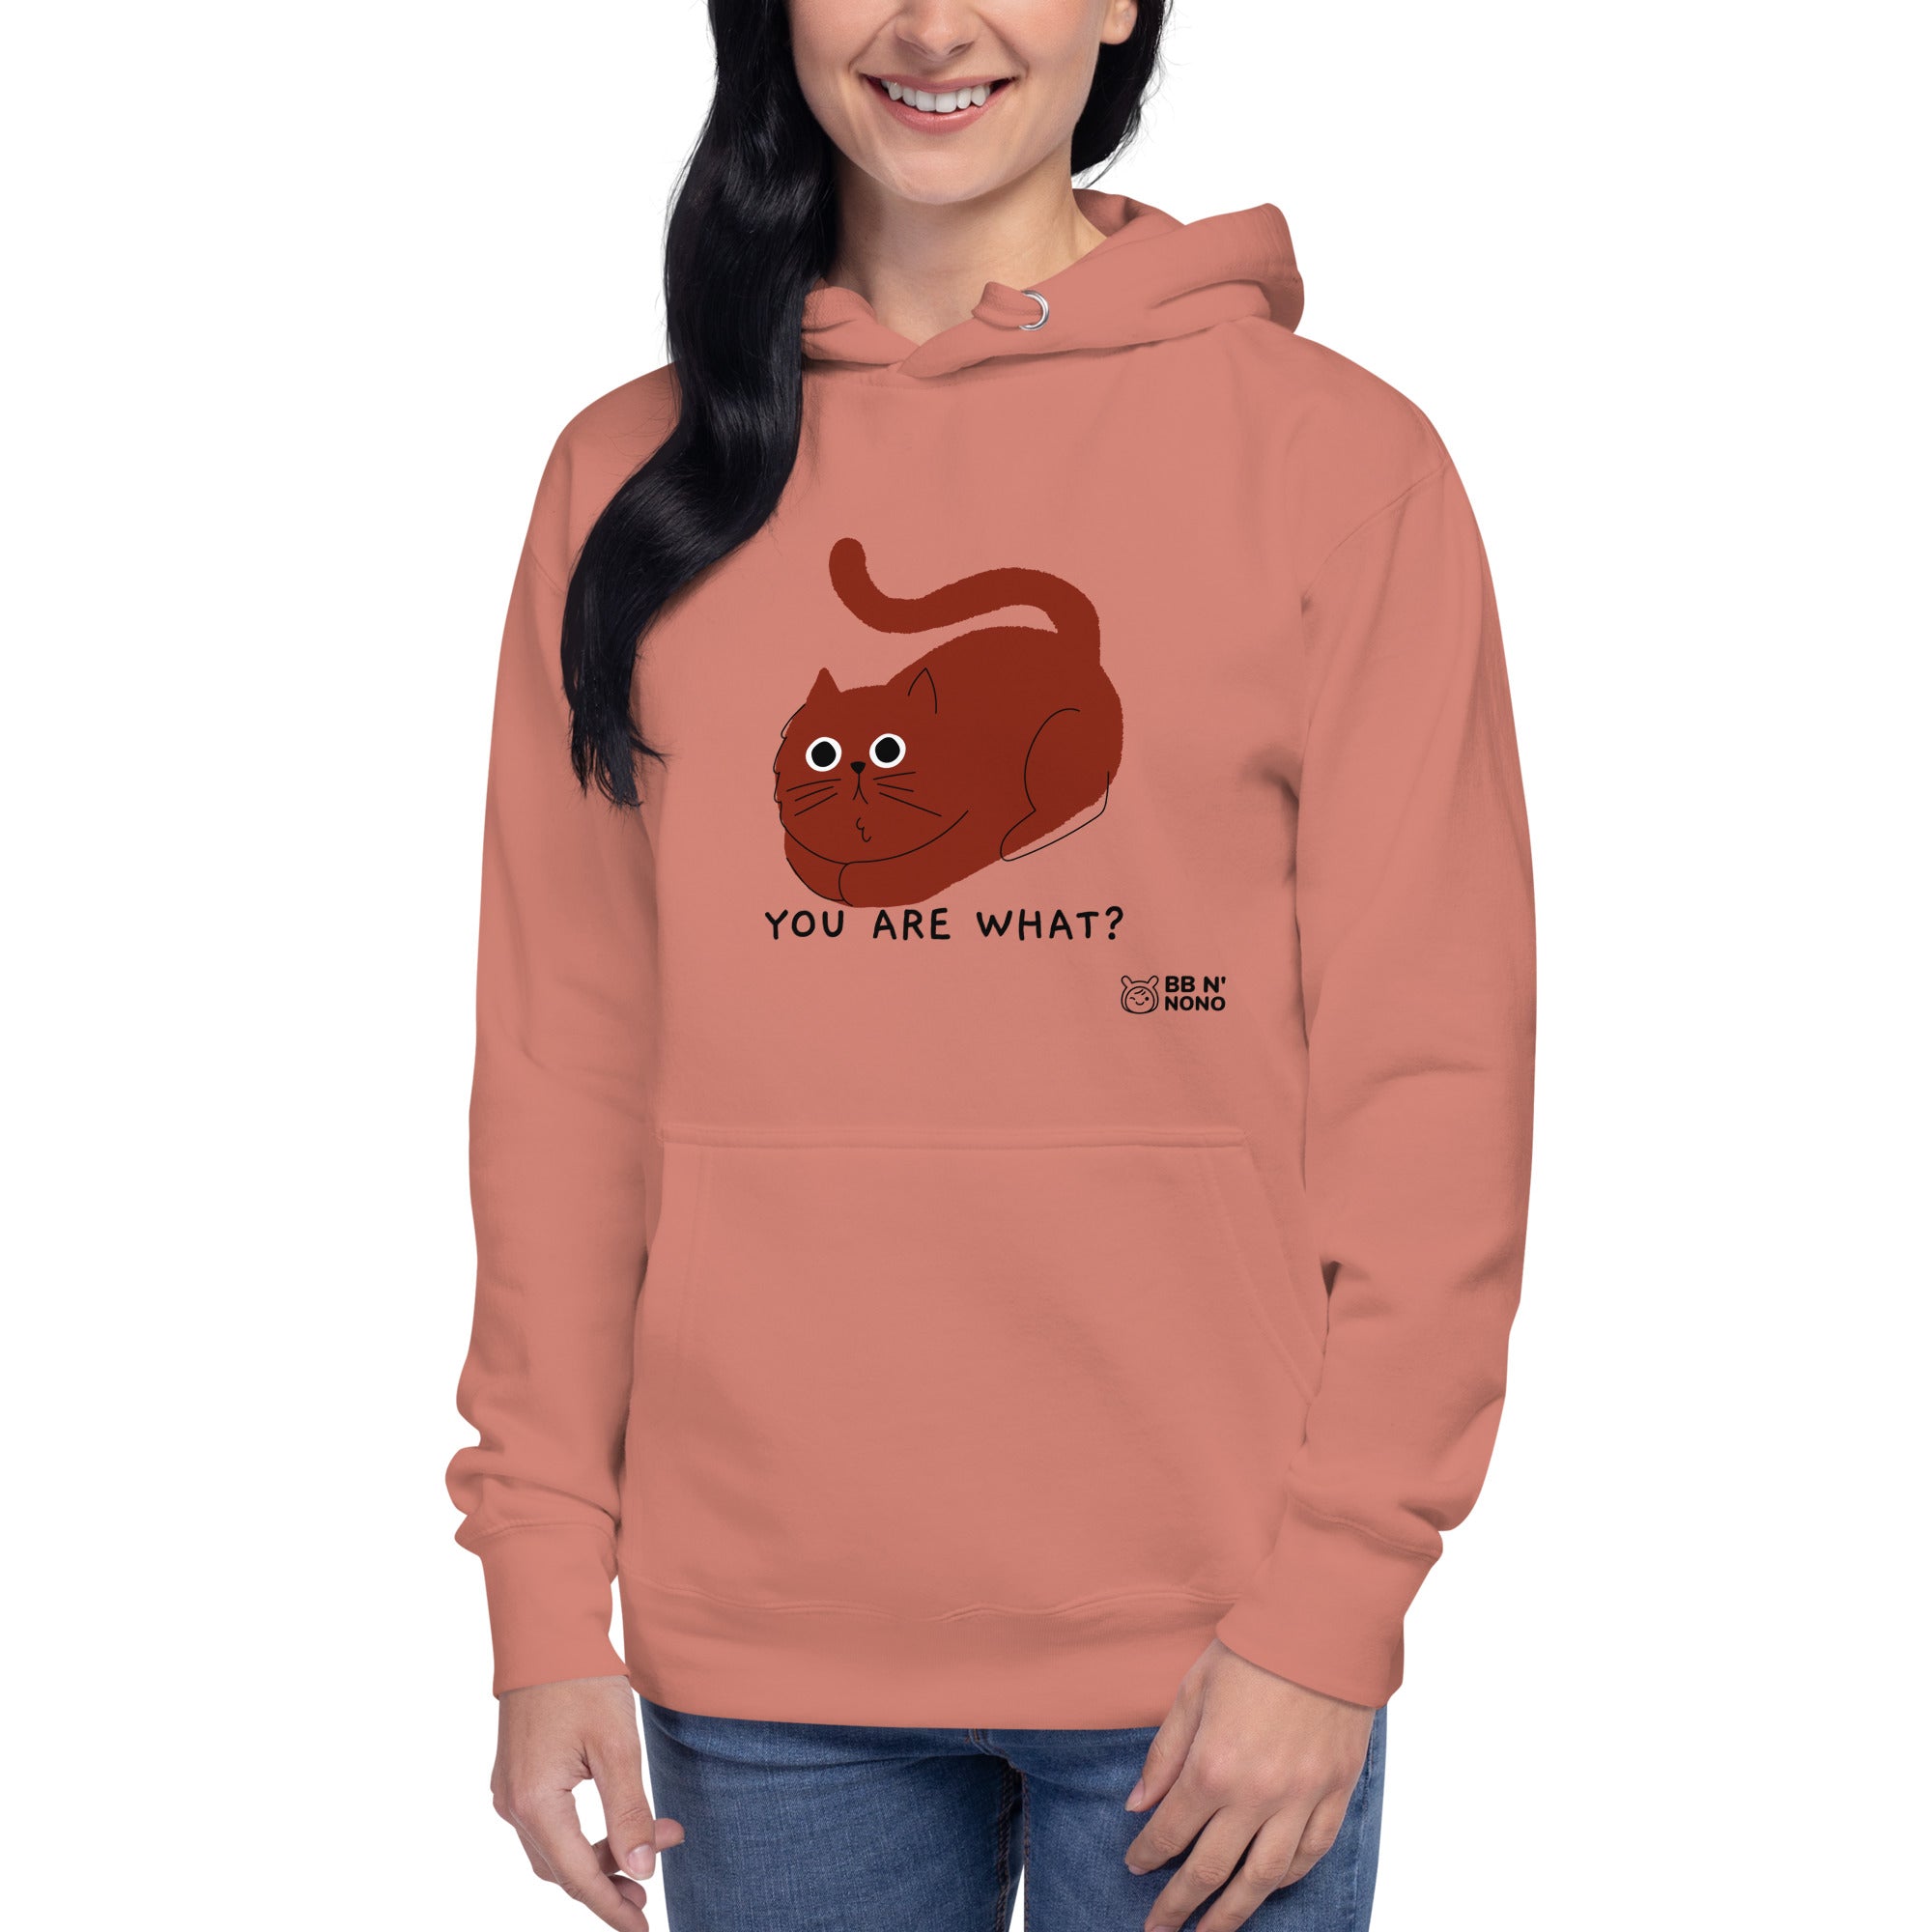 You are what? - Unisex Hoodie